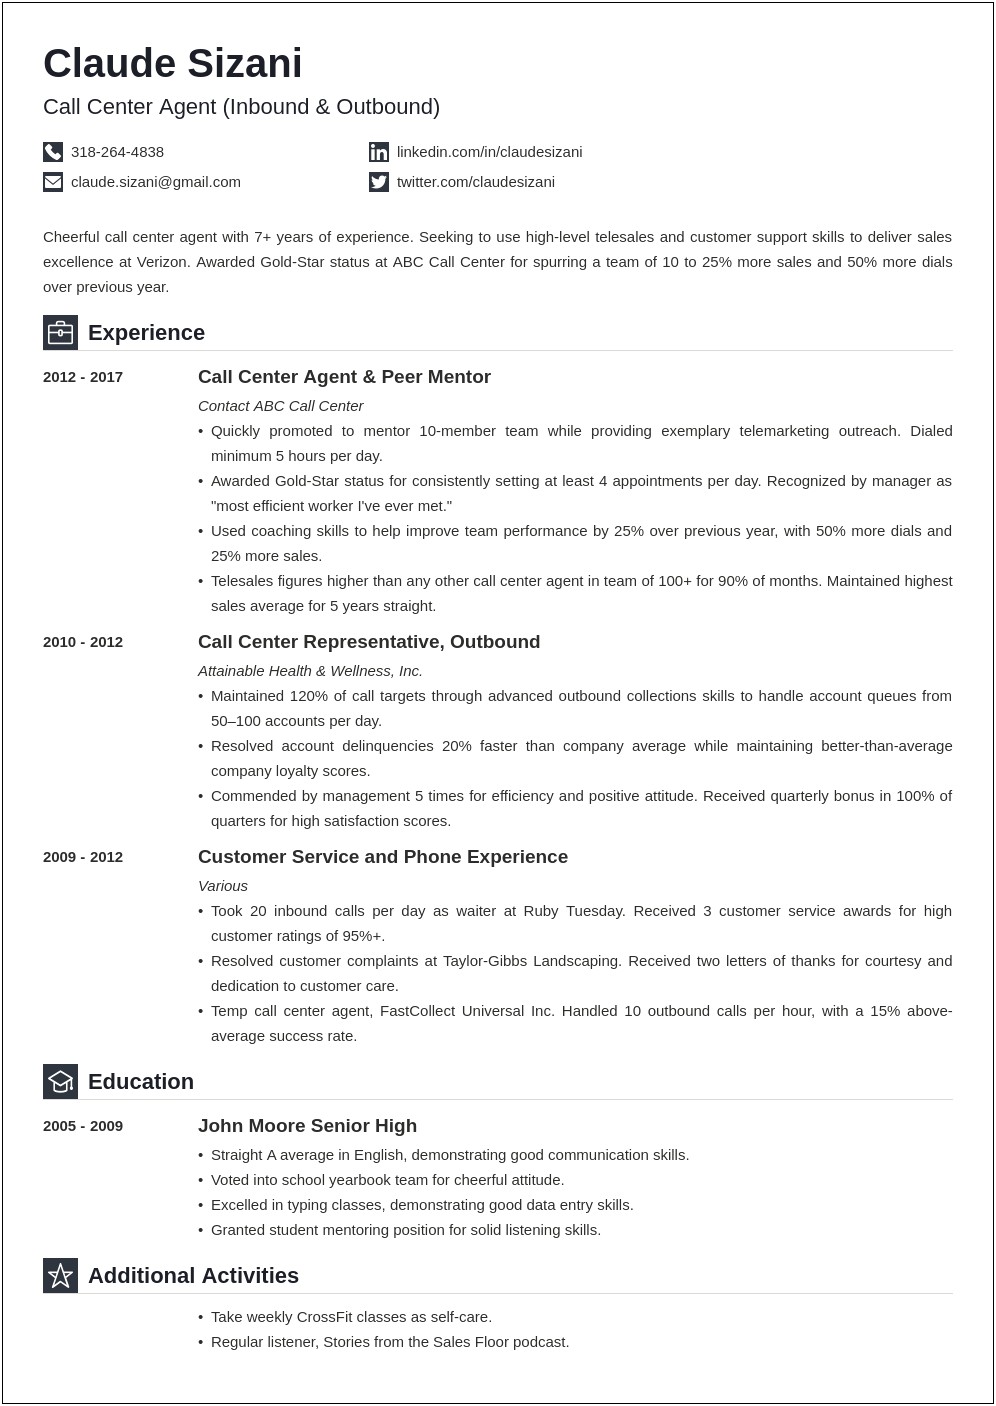 Example Resume For Call Center